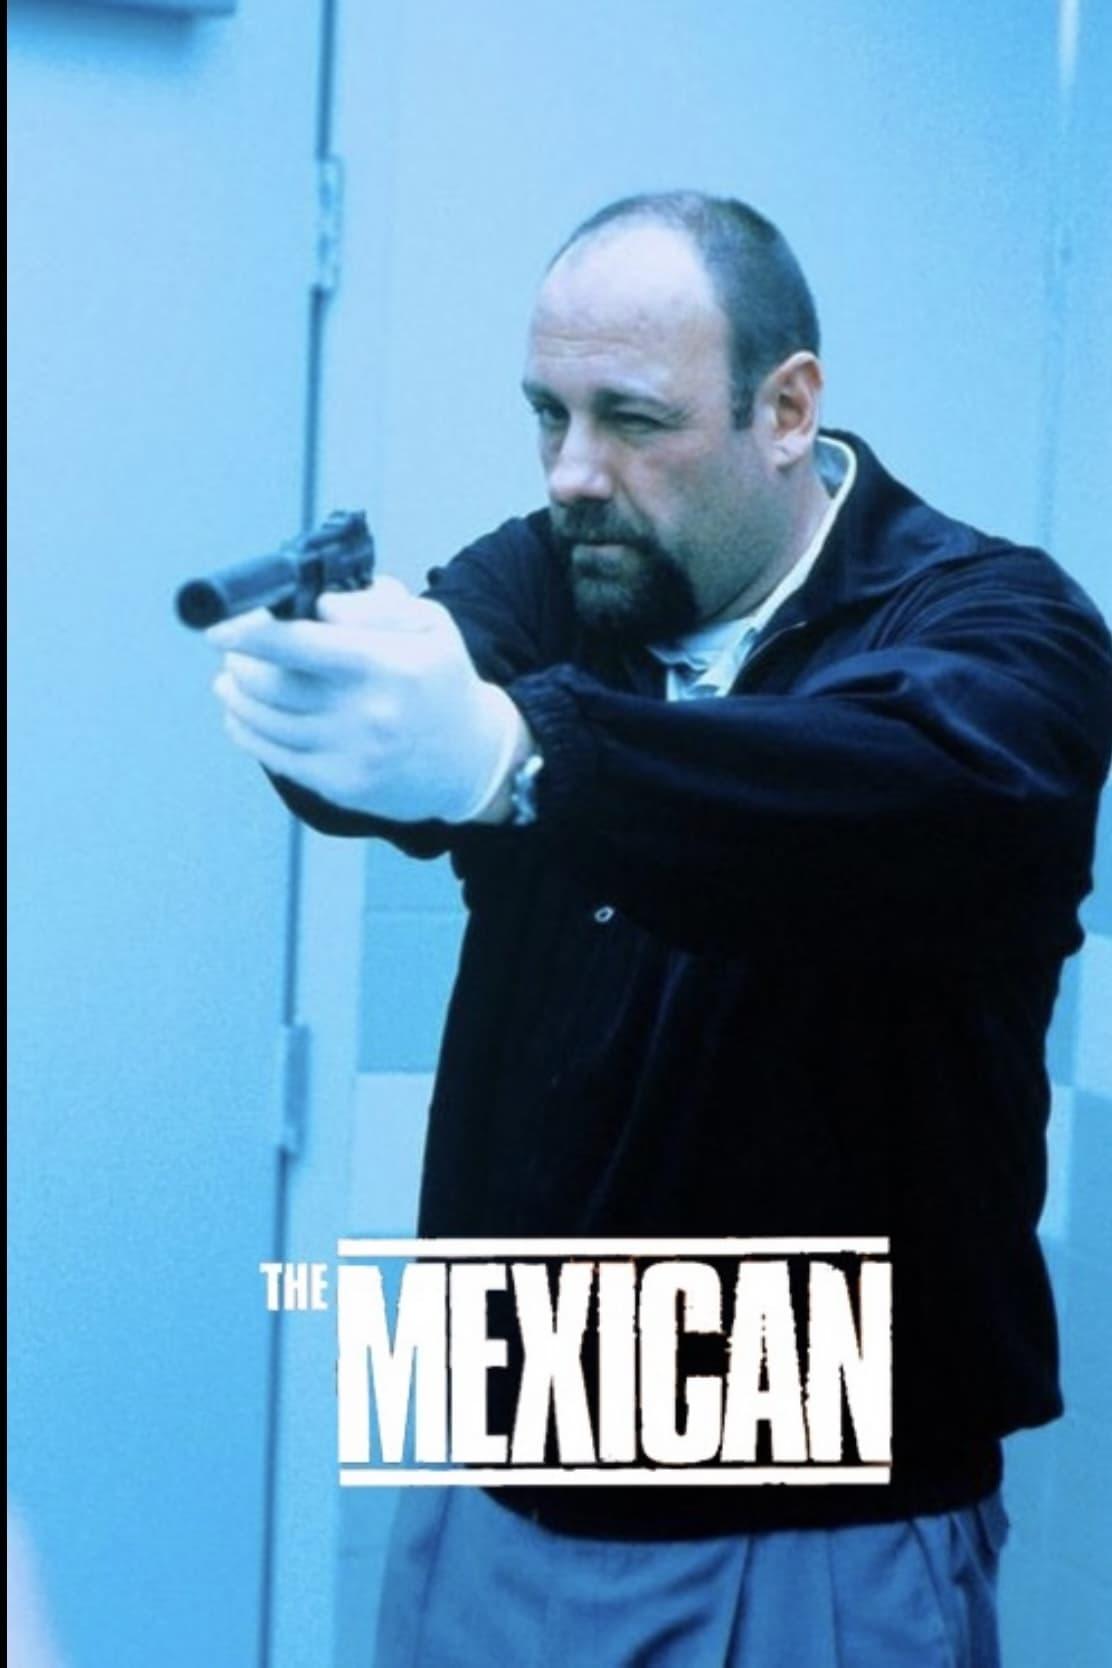 The Mexican poster